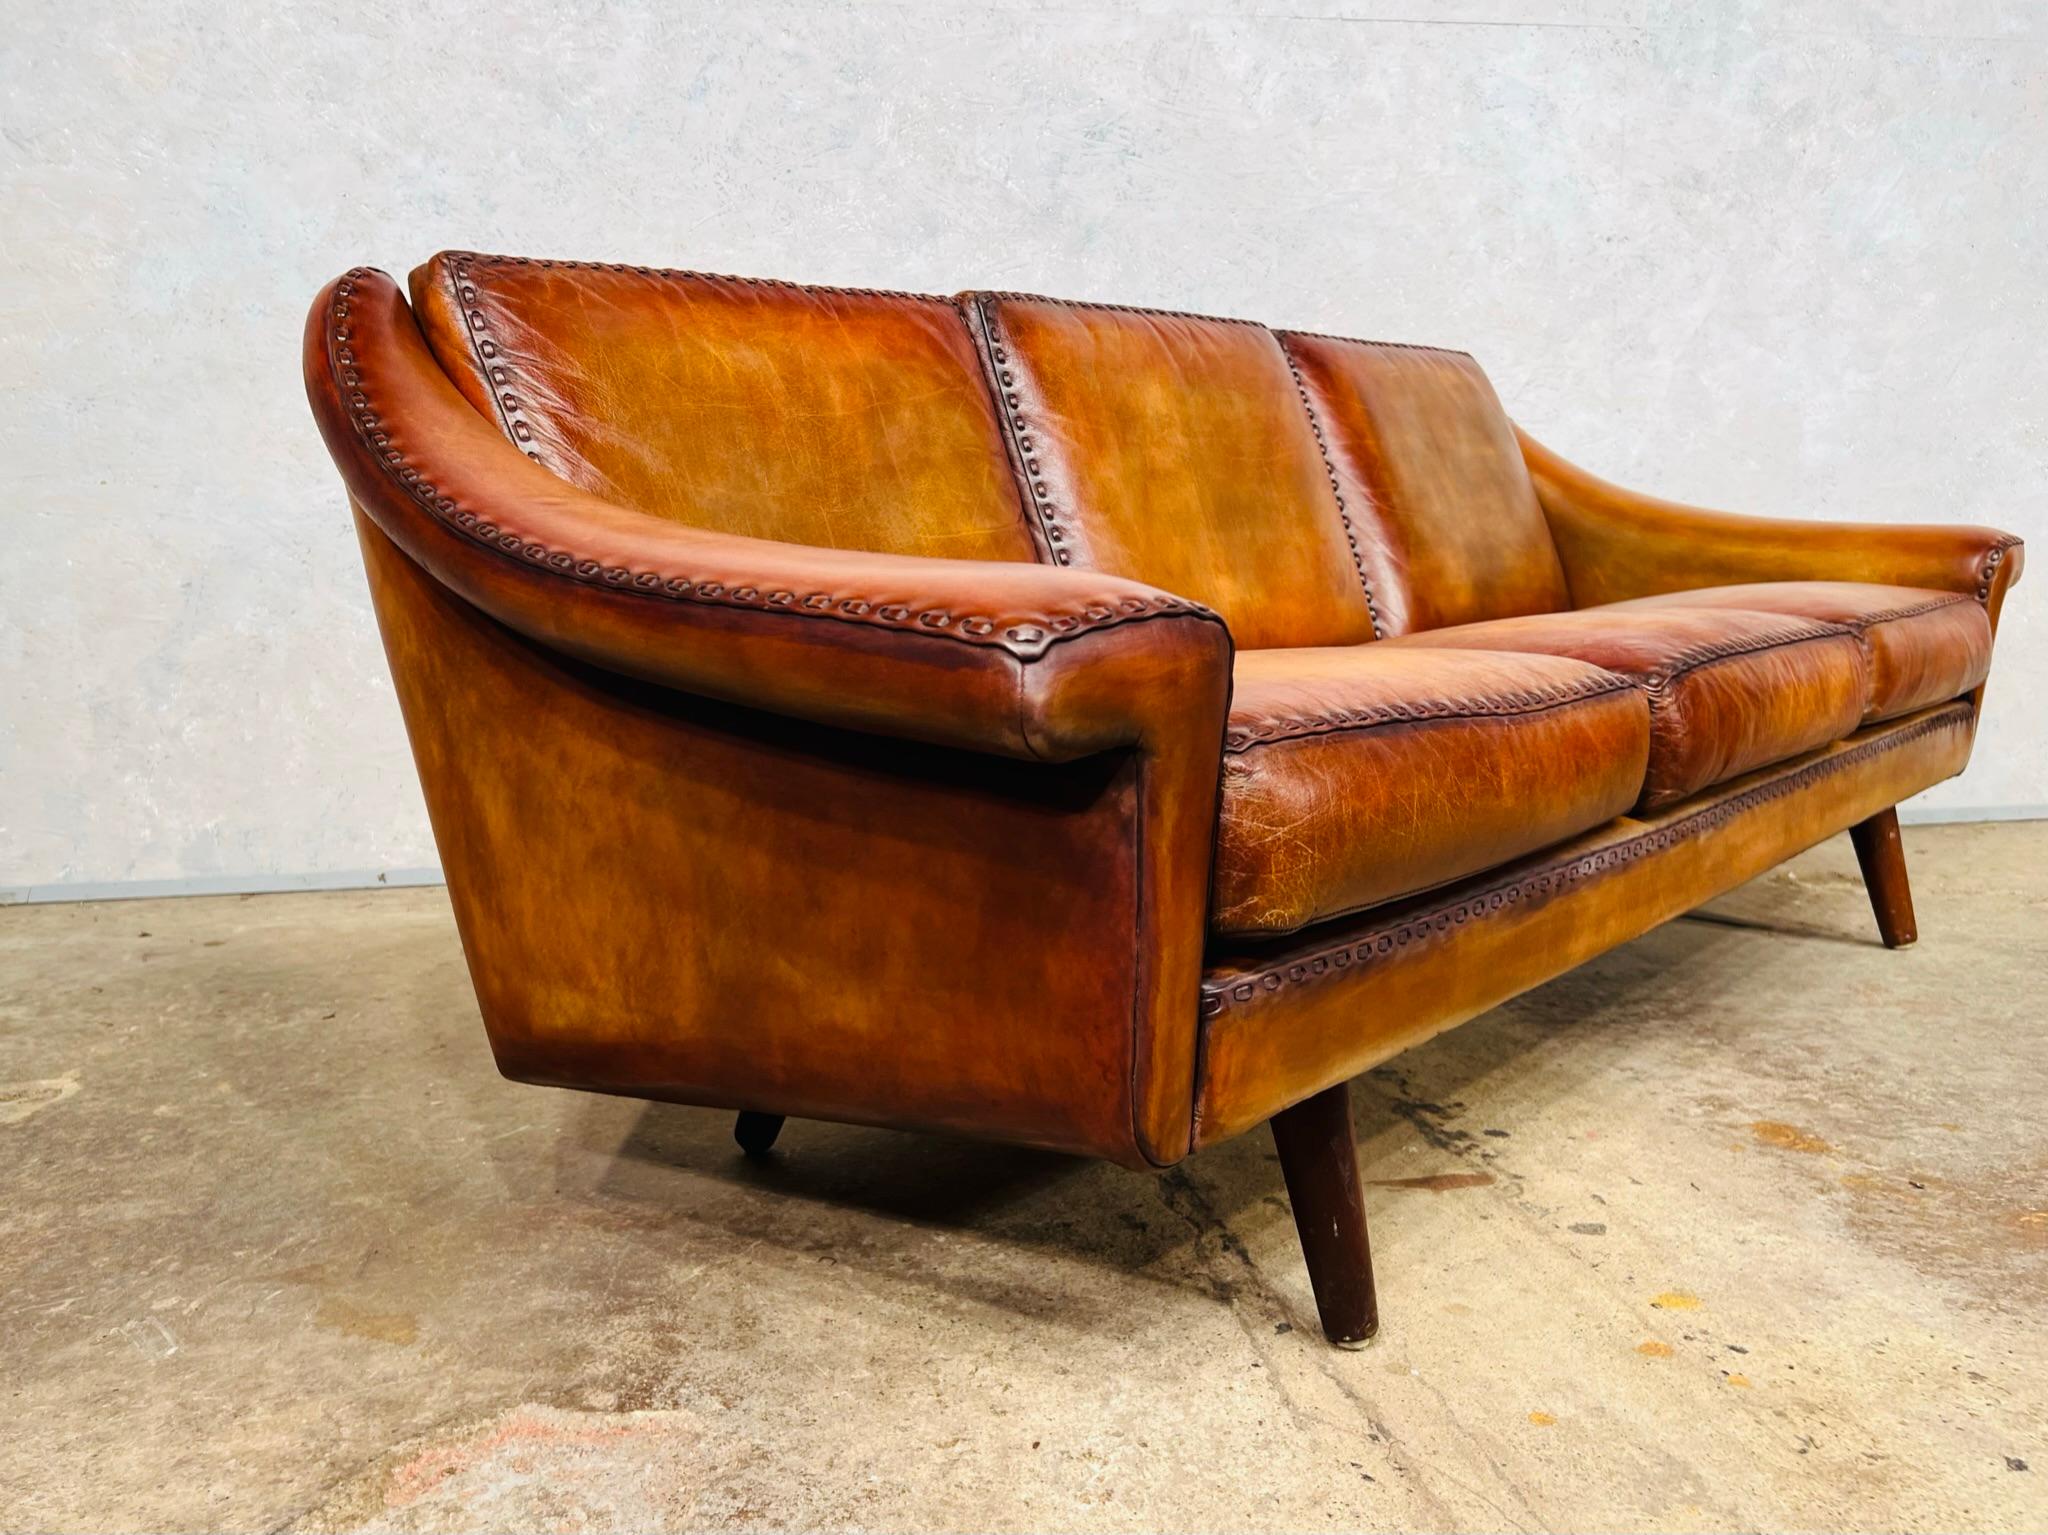 Matador Sofas by Aage Christiansen for Eran dating 1960s.

A great design and shape, Aage Christiansen took the inspiration from a Matadors hat, the quality and craftsmanship is exceptional with comfortable edge sewn cushions.

Viewings welcome at